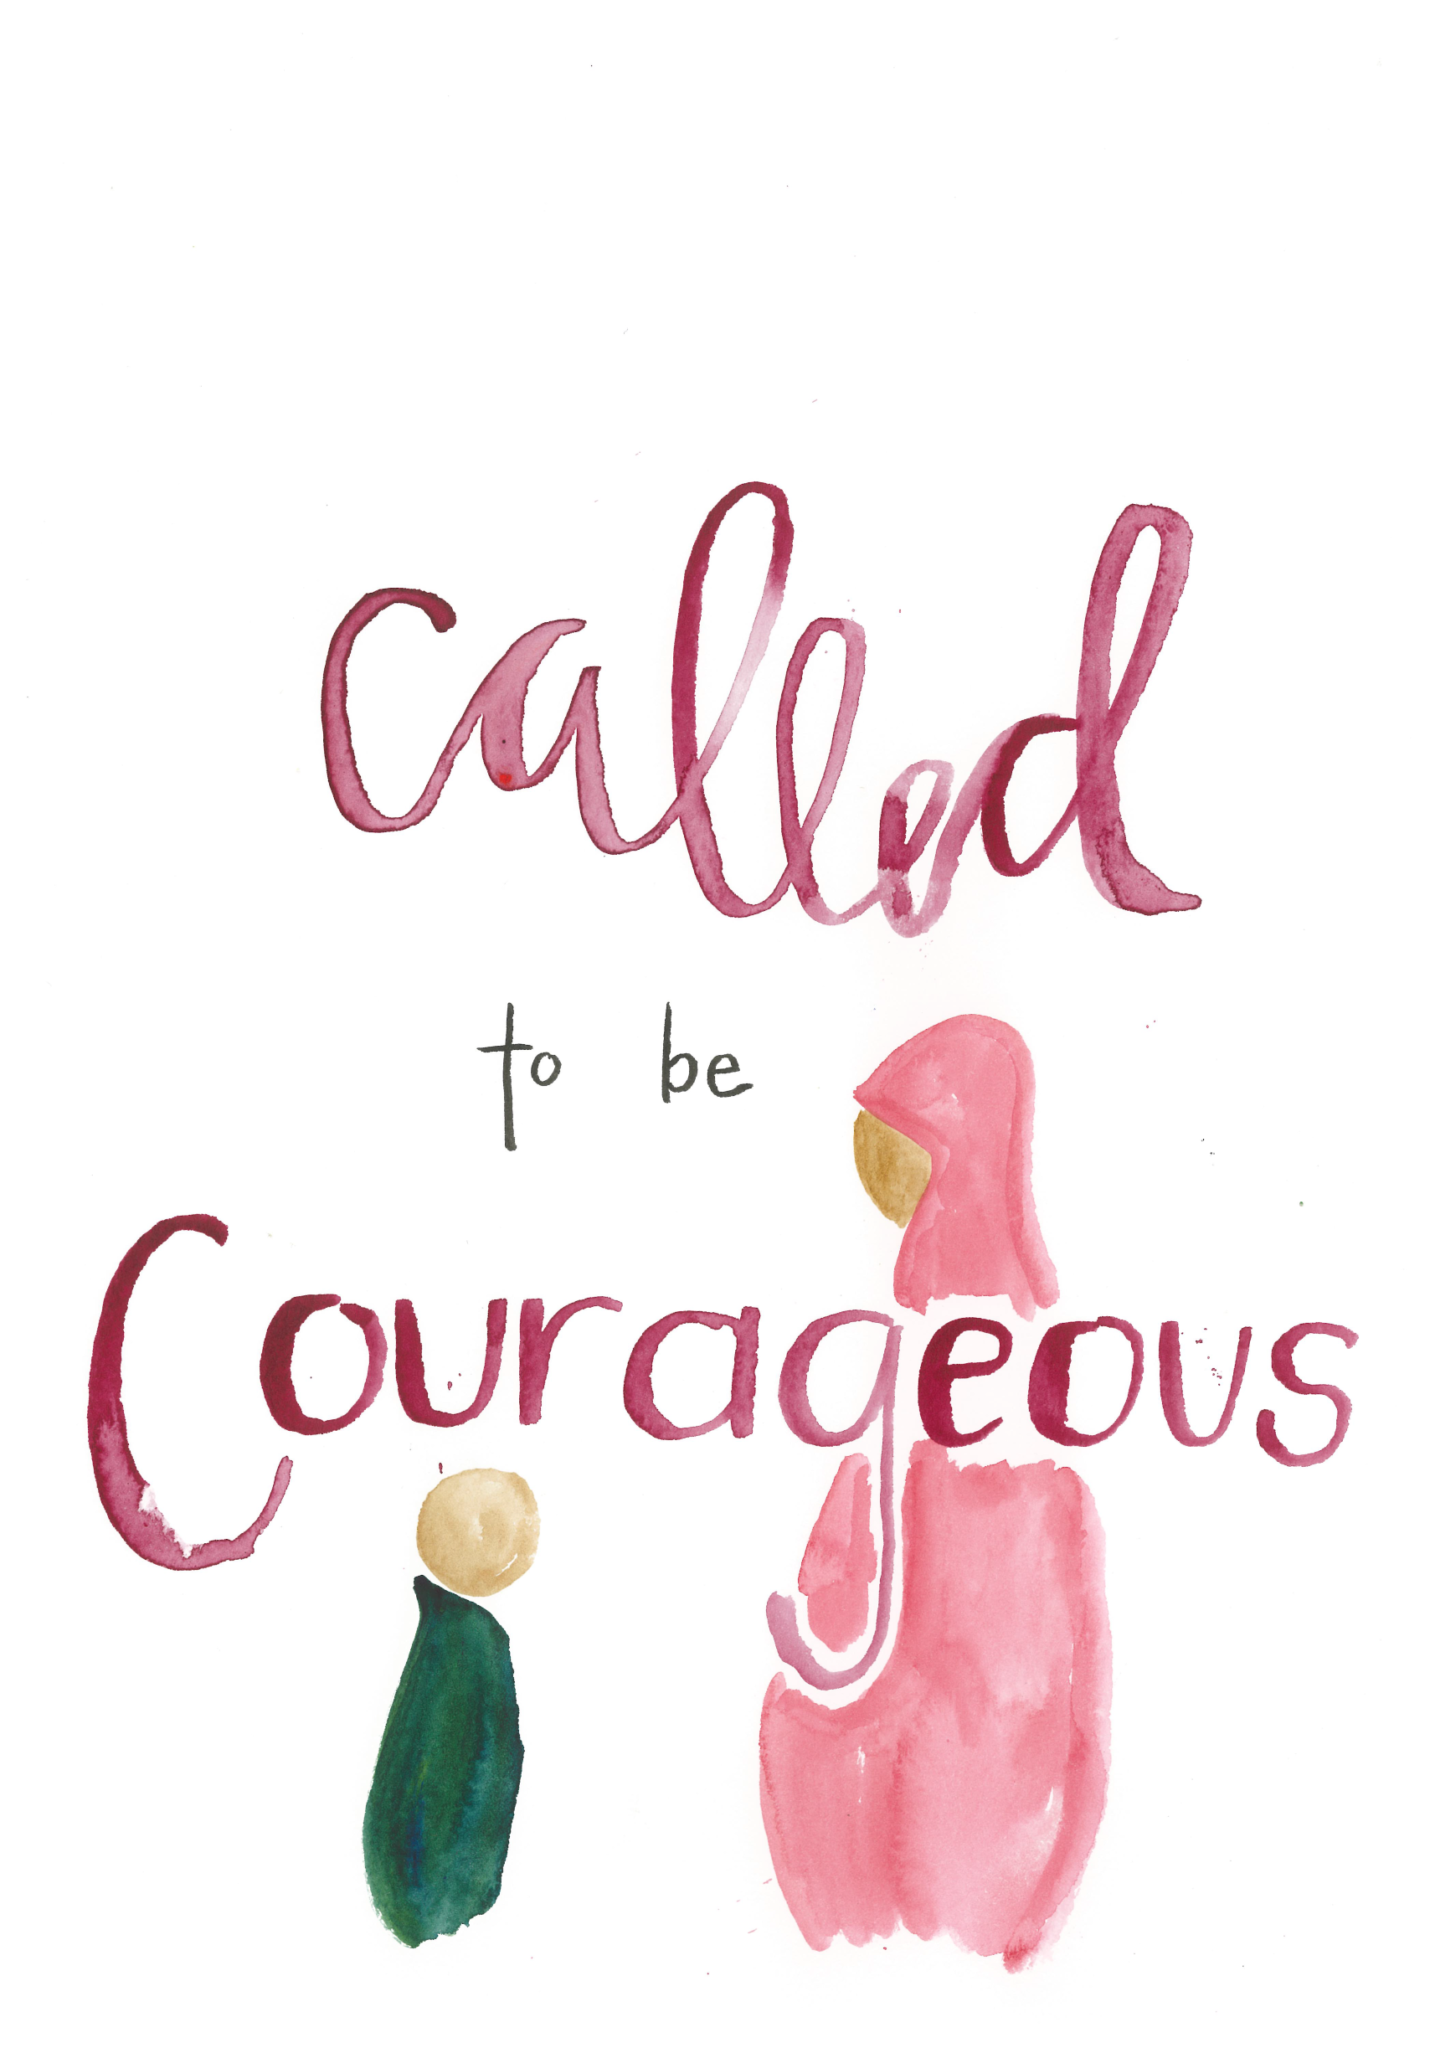 The words "called to be courageous" with an image of Jehosheba and her brother